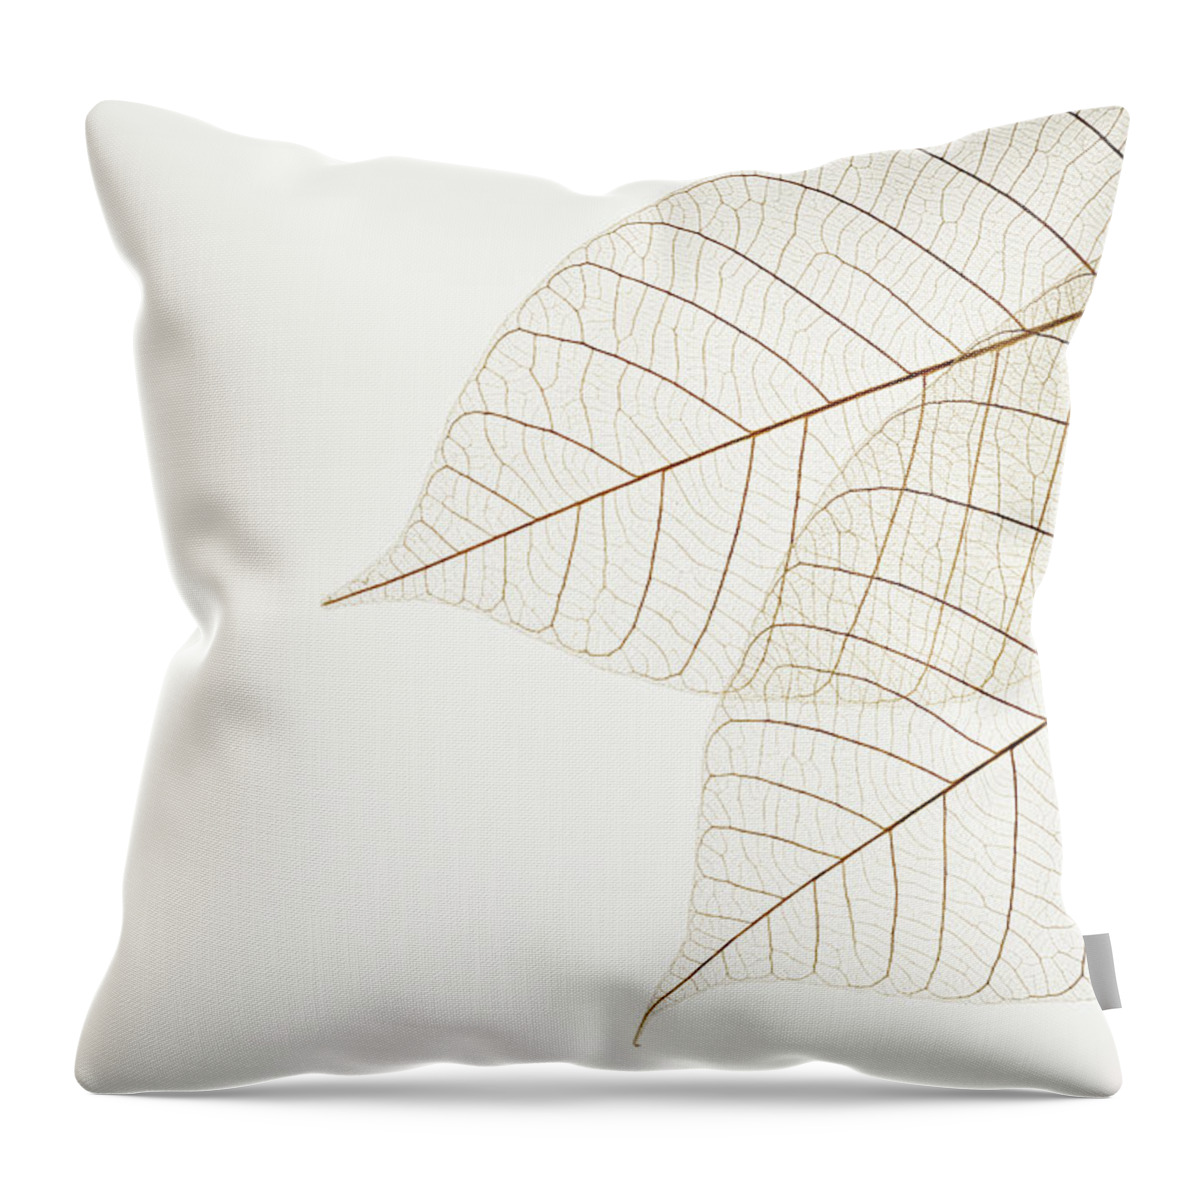 White Background Throw Pillow featuring the photograph Isolated Shot Of Two Leaf Veins On by Kyoshino